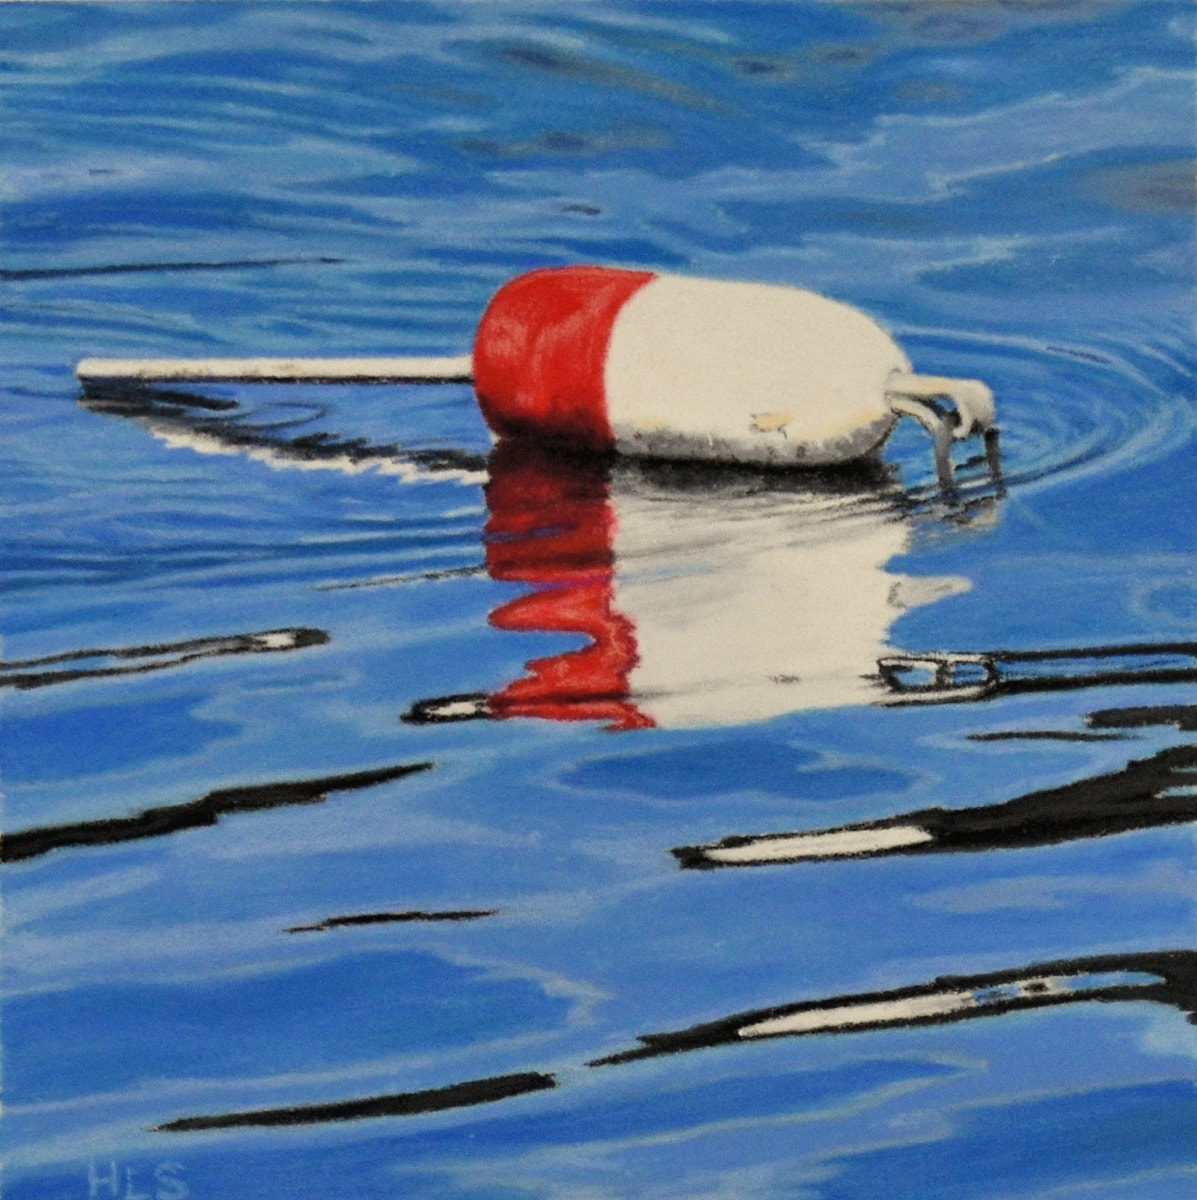 Lobster Buoy #1 - Print Only - Limited Edition of 50 - Signed and